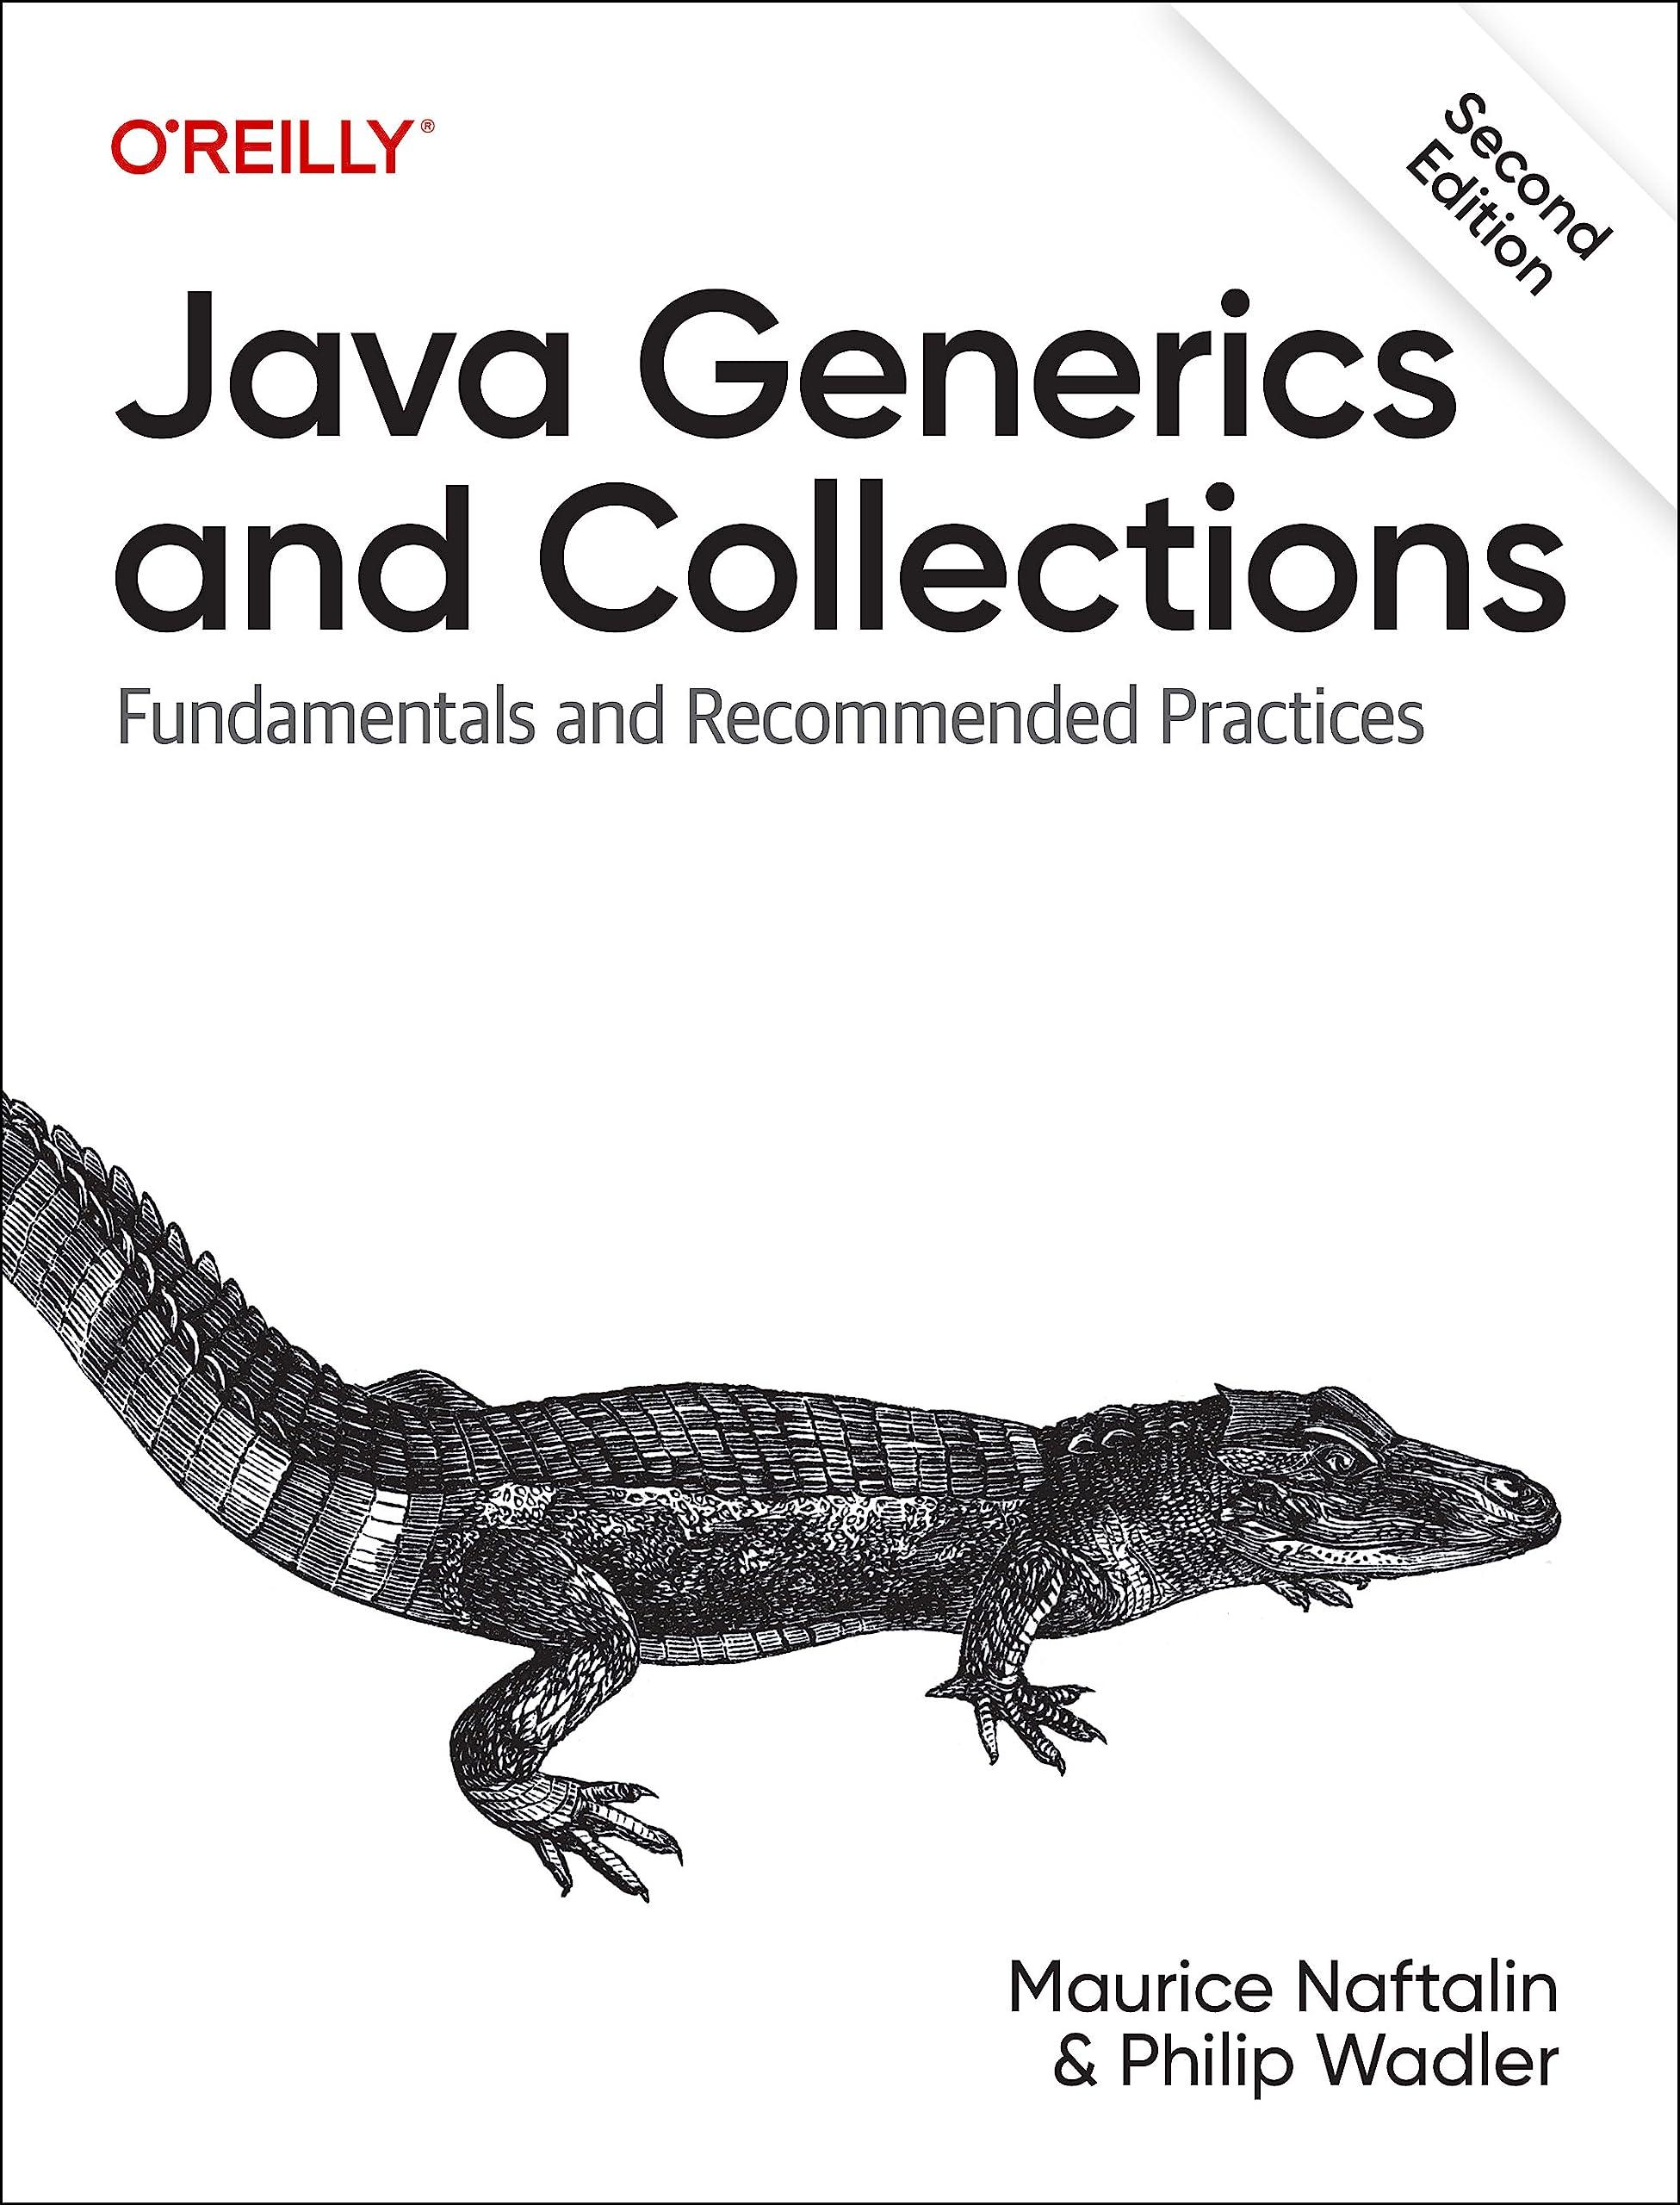 ava generics and collections fundamentals and recommended practices 2nd edition maurice naftalin , philip